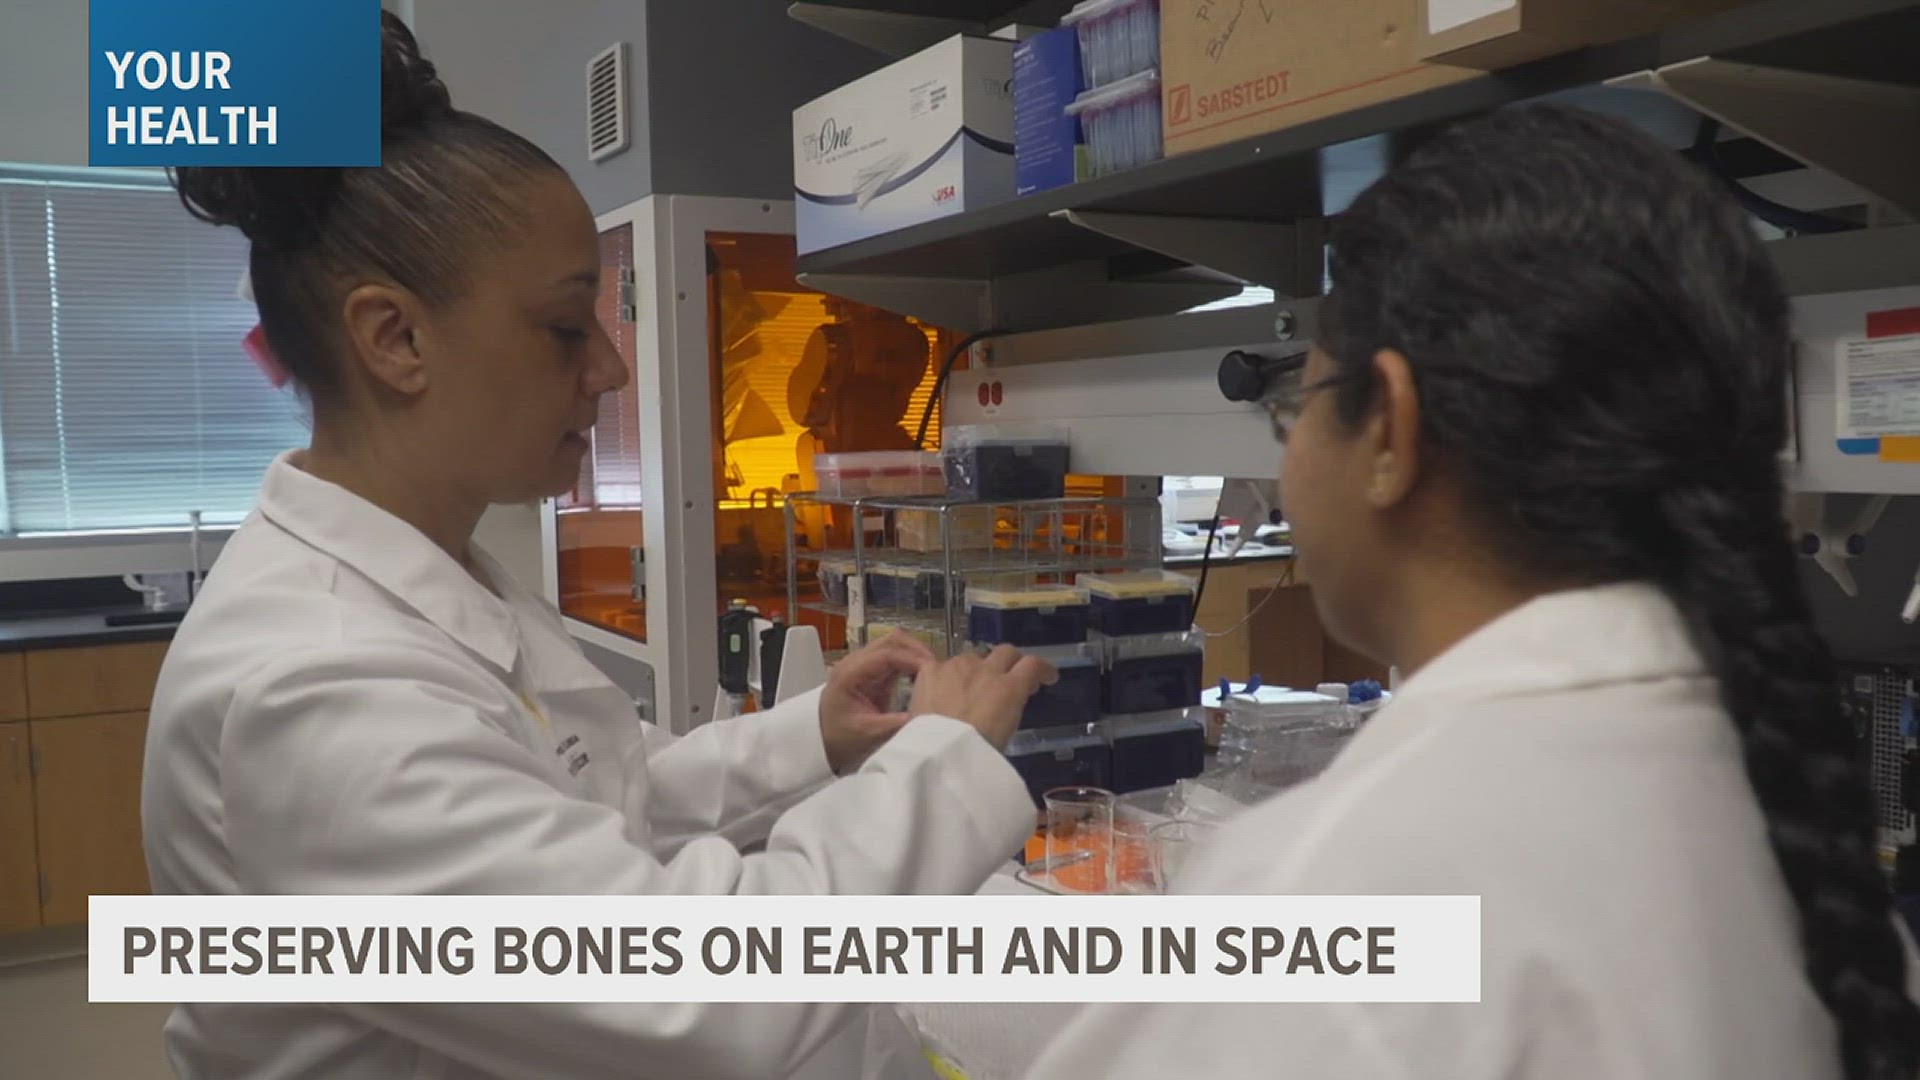 Researcher Coathup is also looking at how fluid changes in the bones impact astronauts in microgravity.